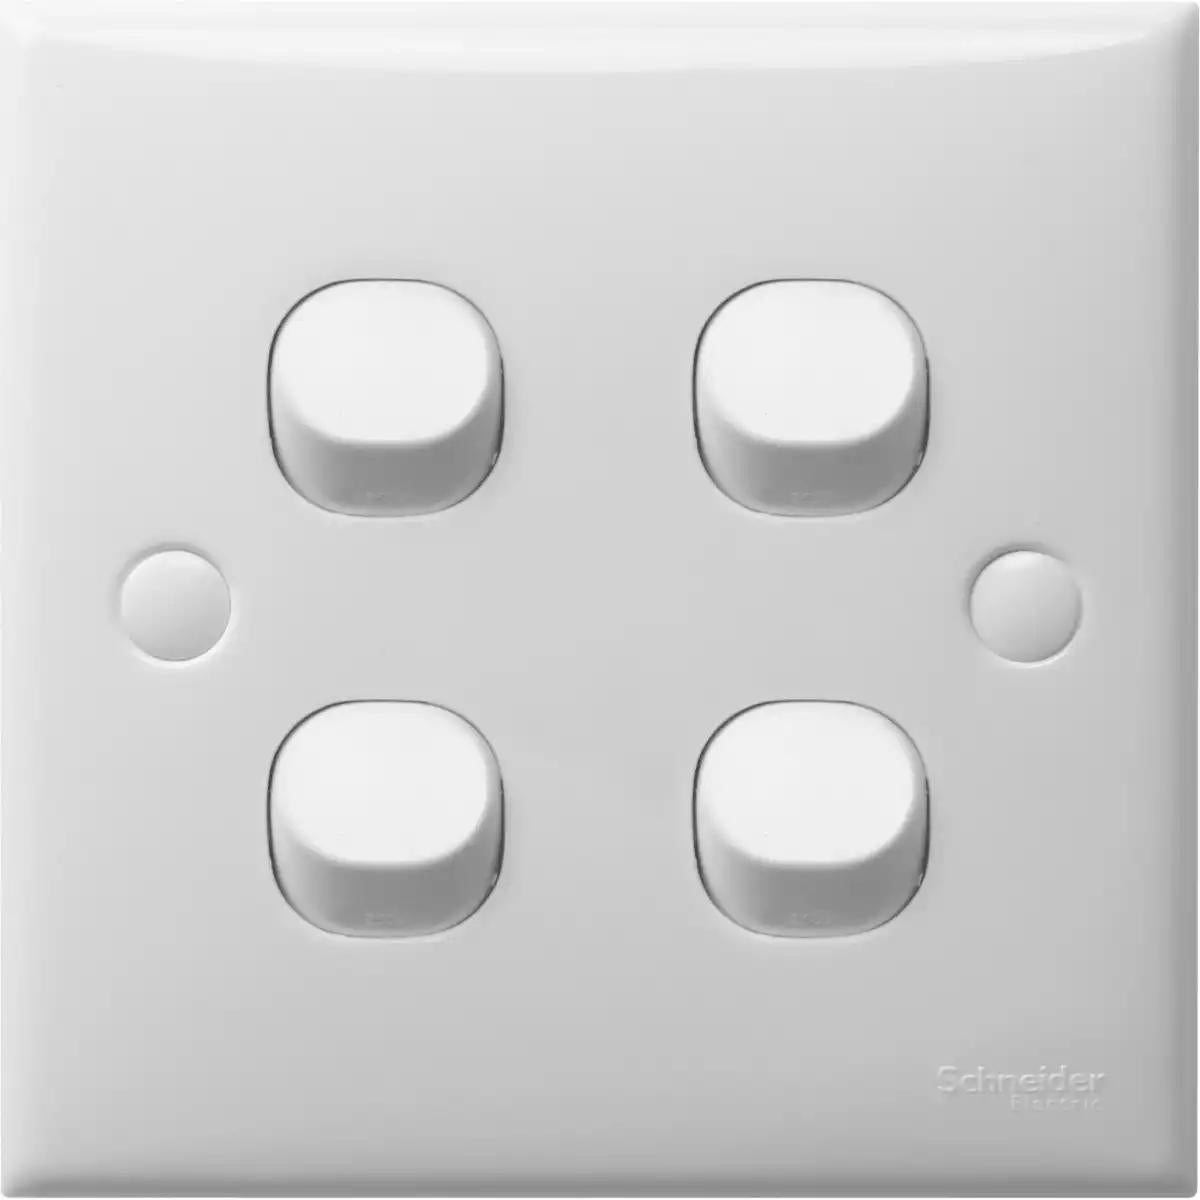 Schneider Electric S-Classic - 2-way switch - 4 gangs - white